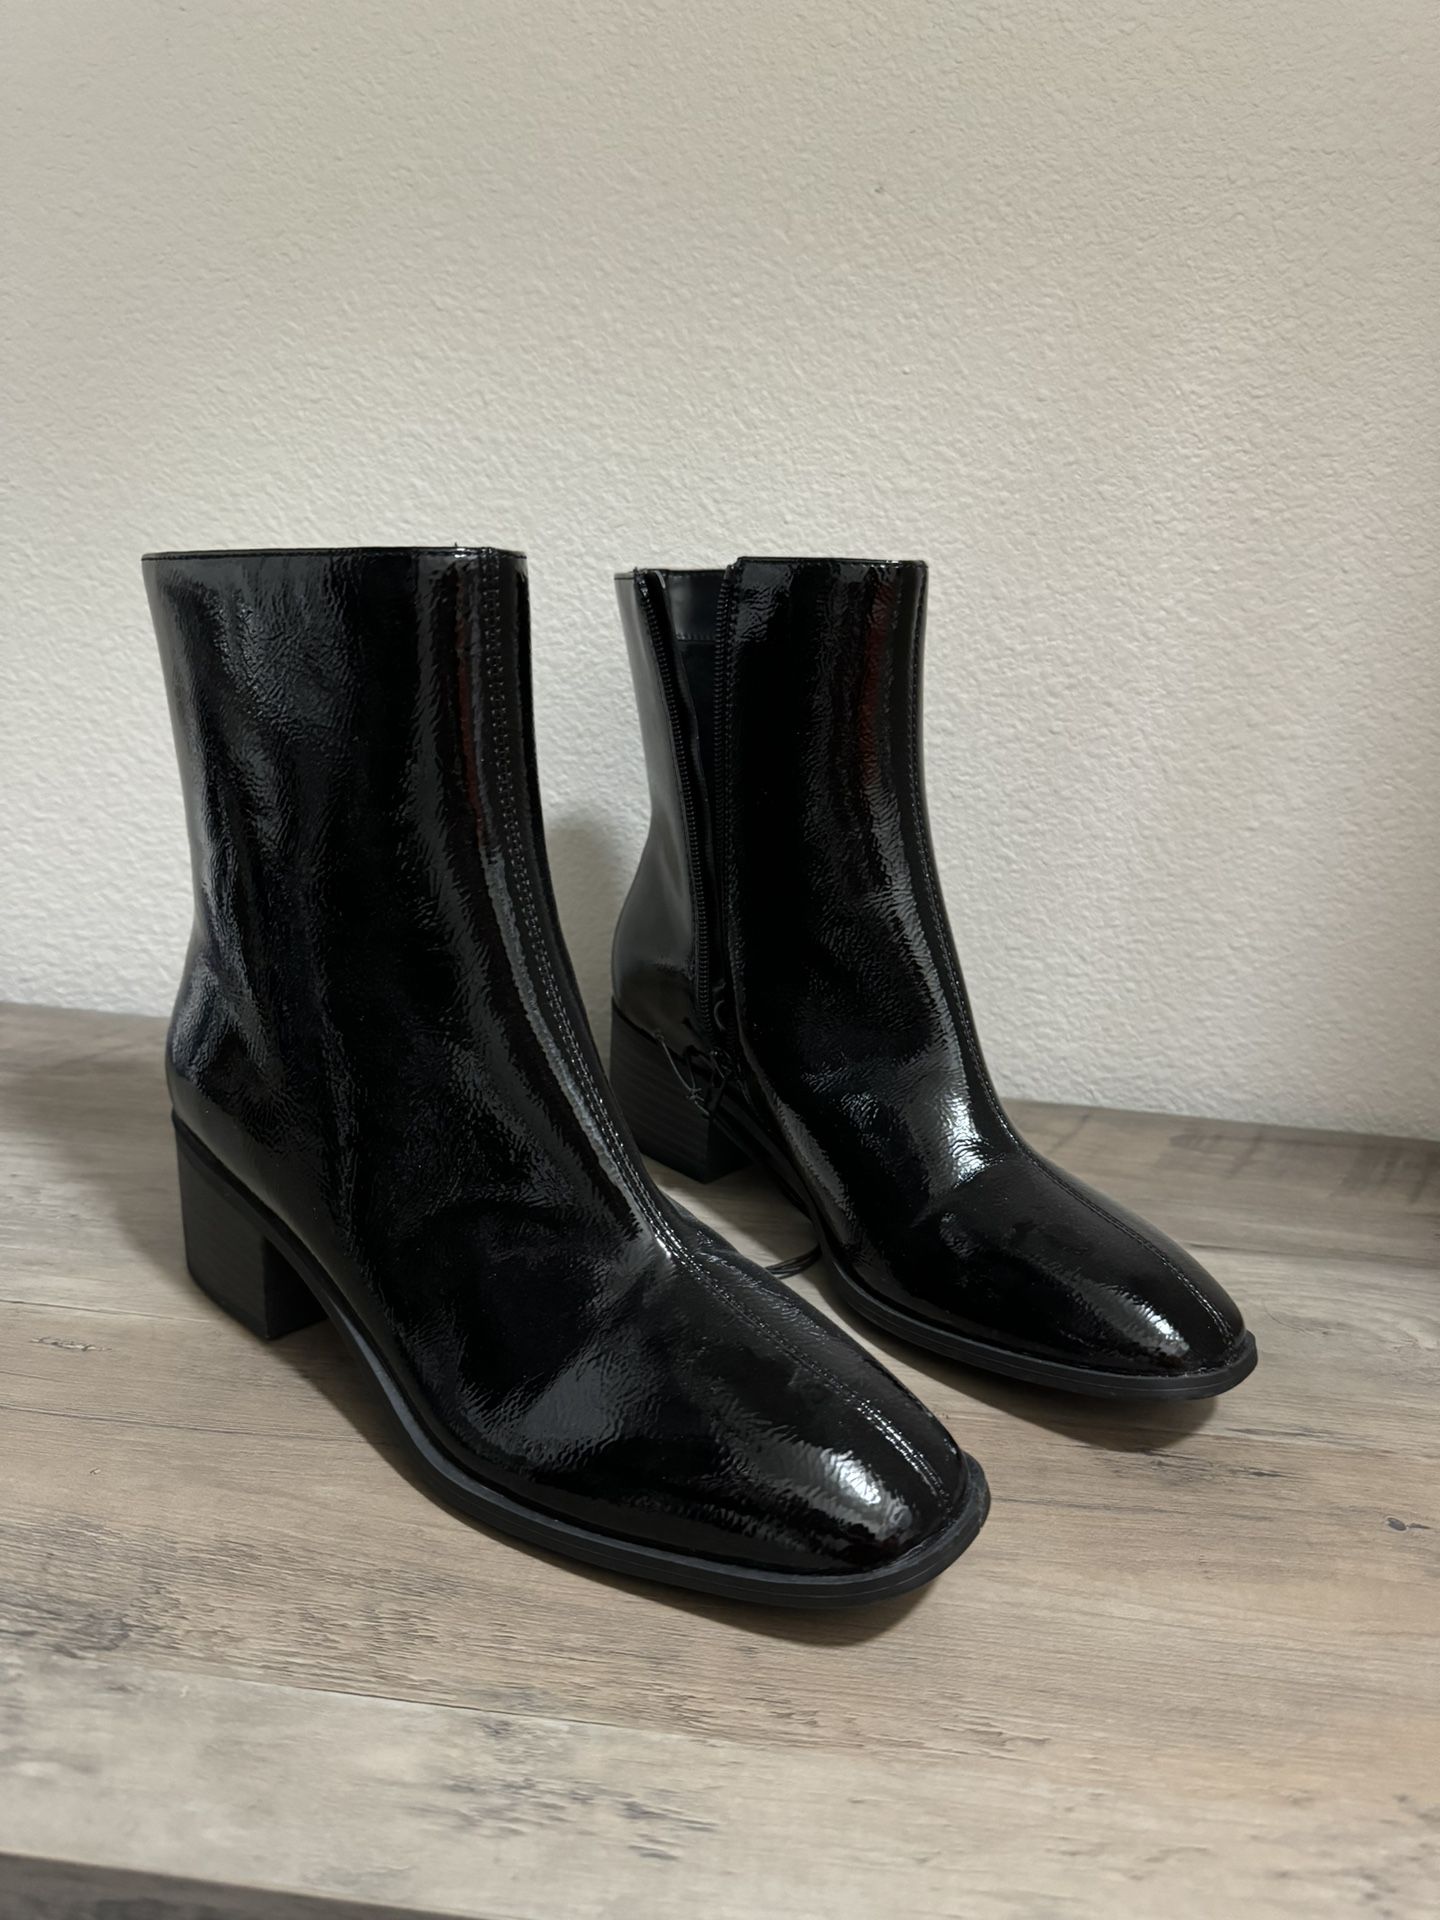 Women’s Boots - Size 9